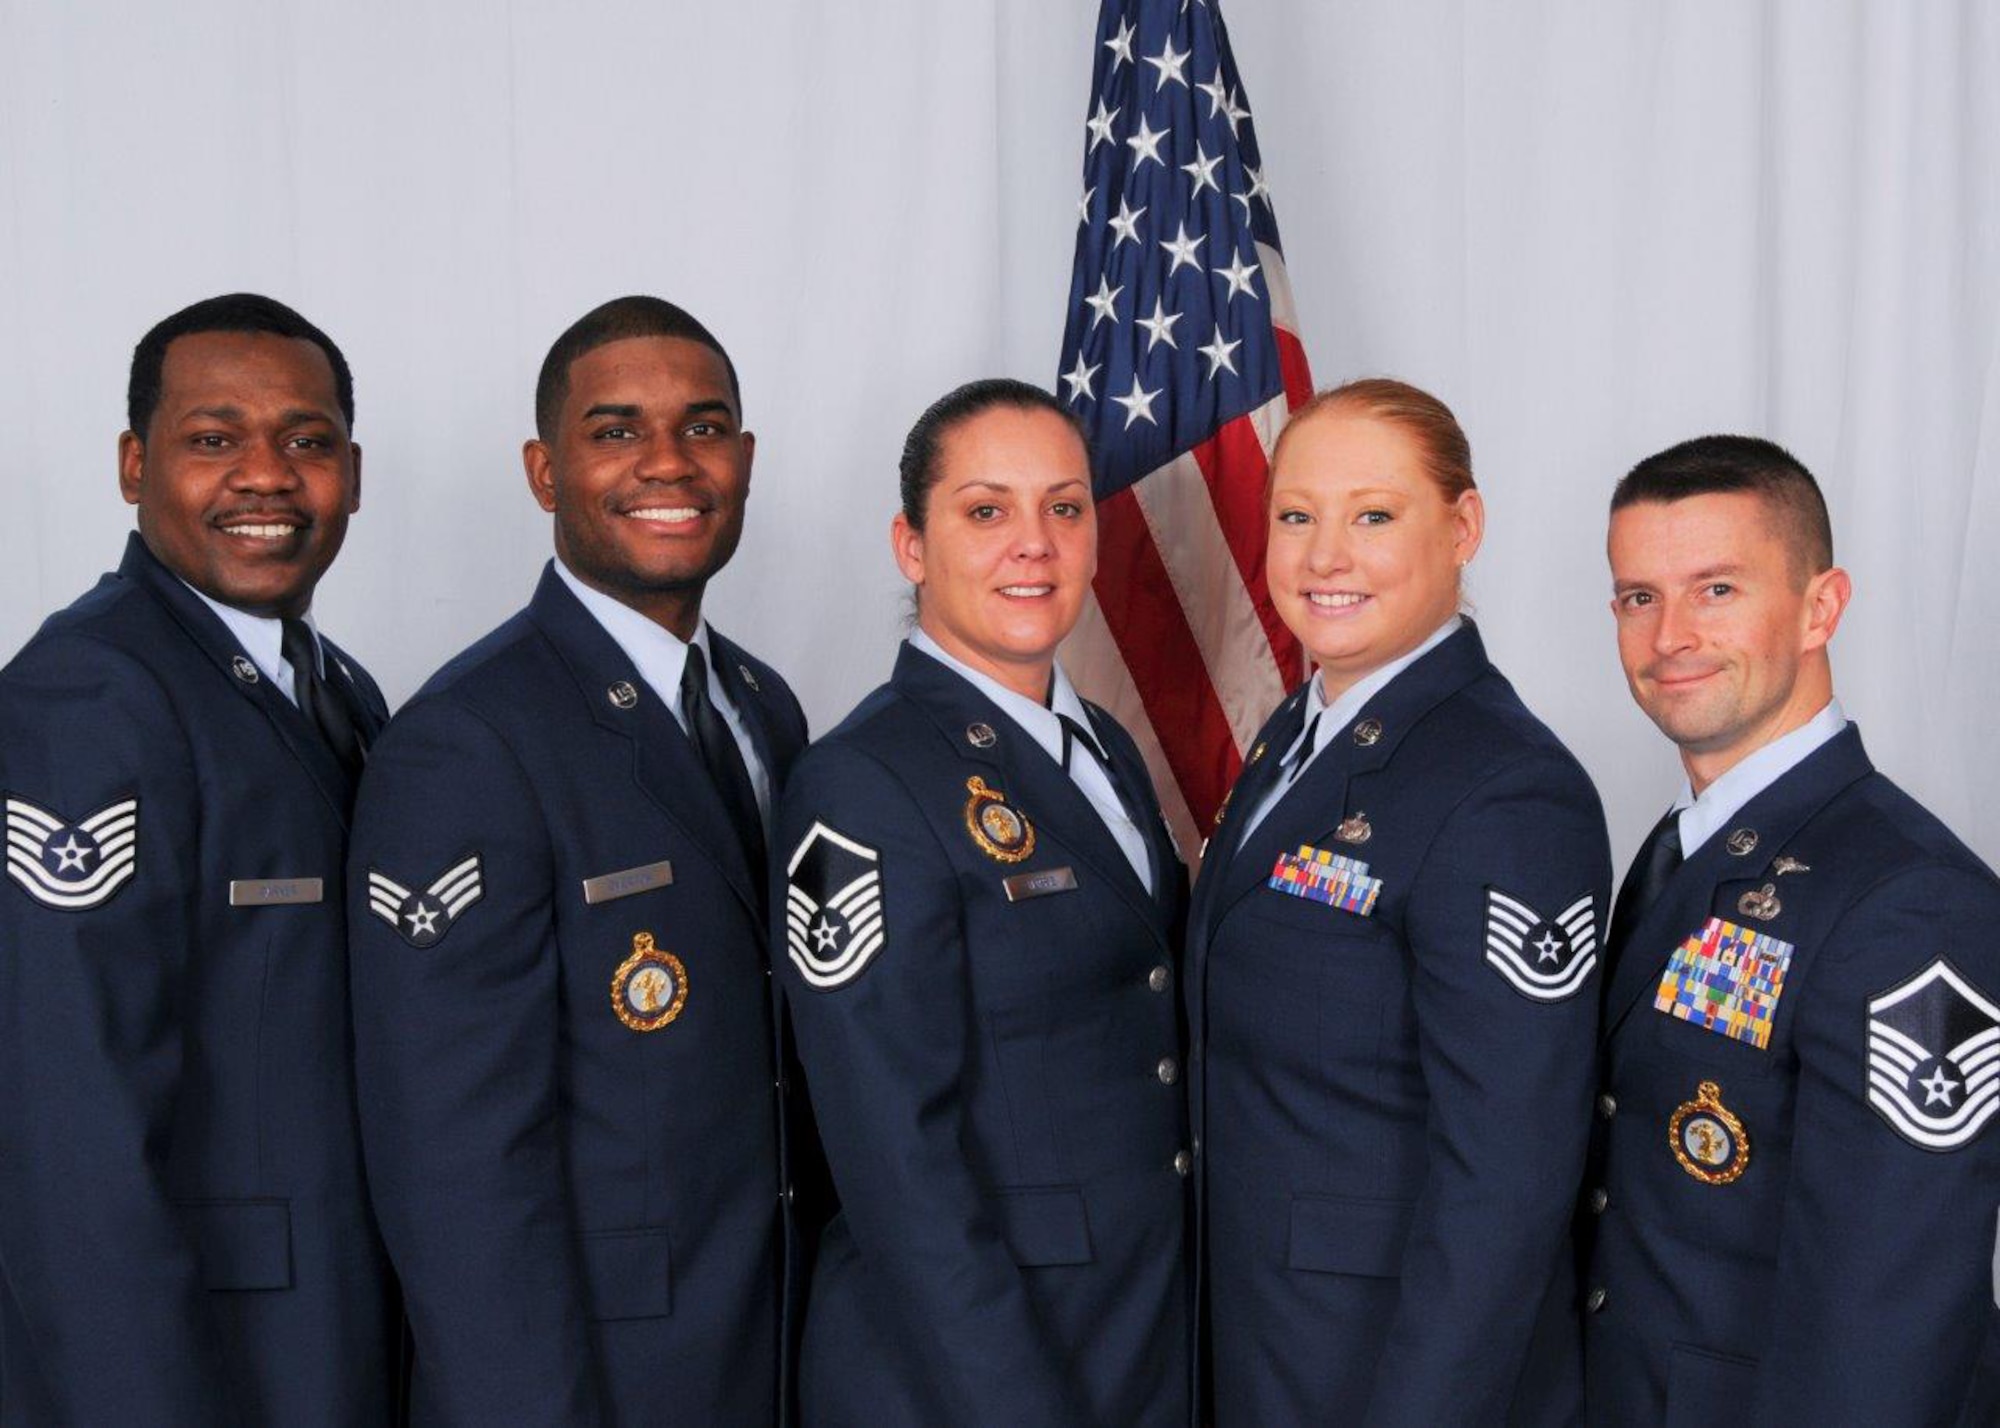 Delaware Air Guard recruiting team and supervisor named best in nation